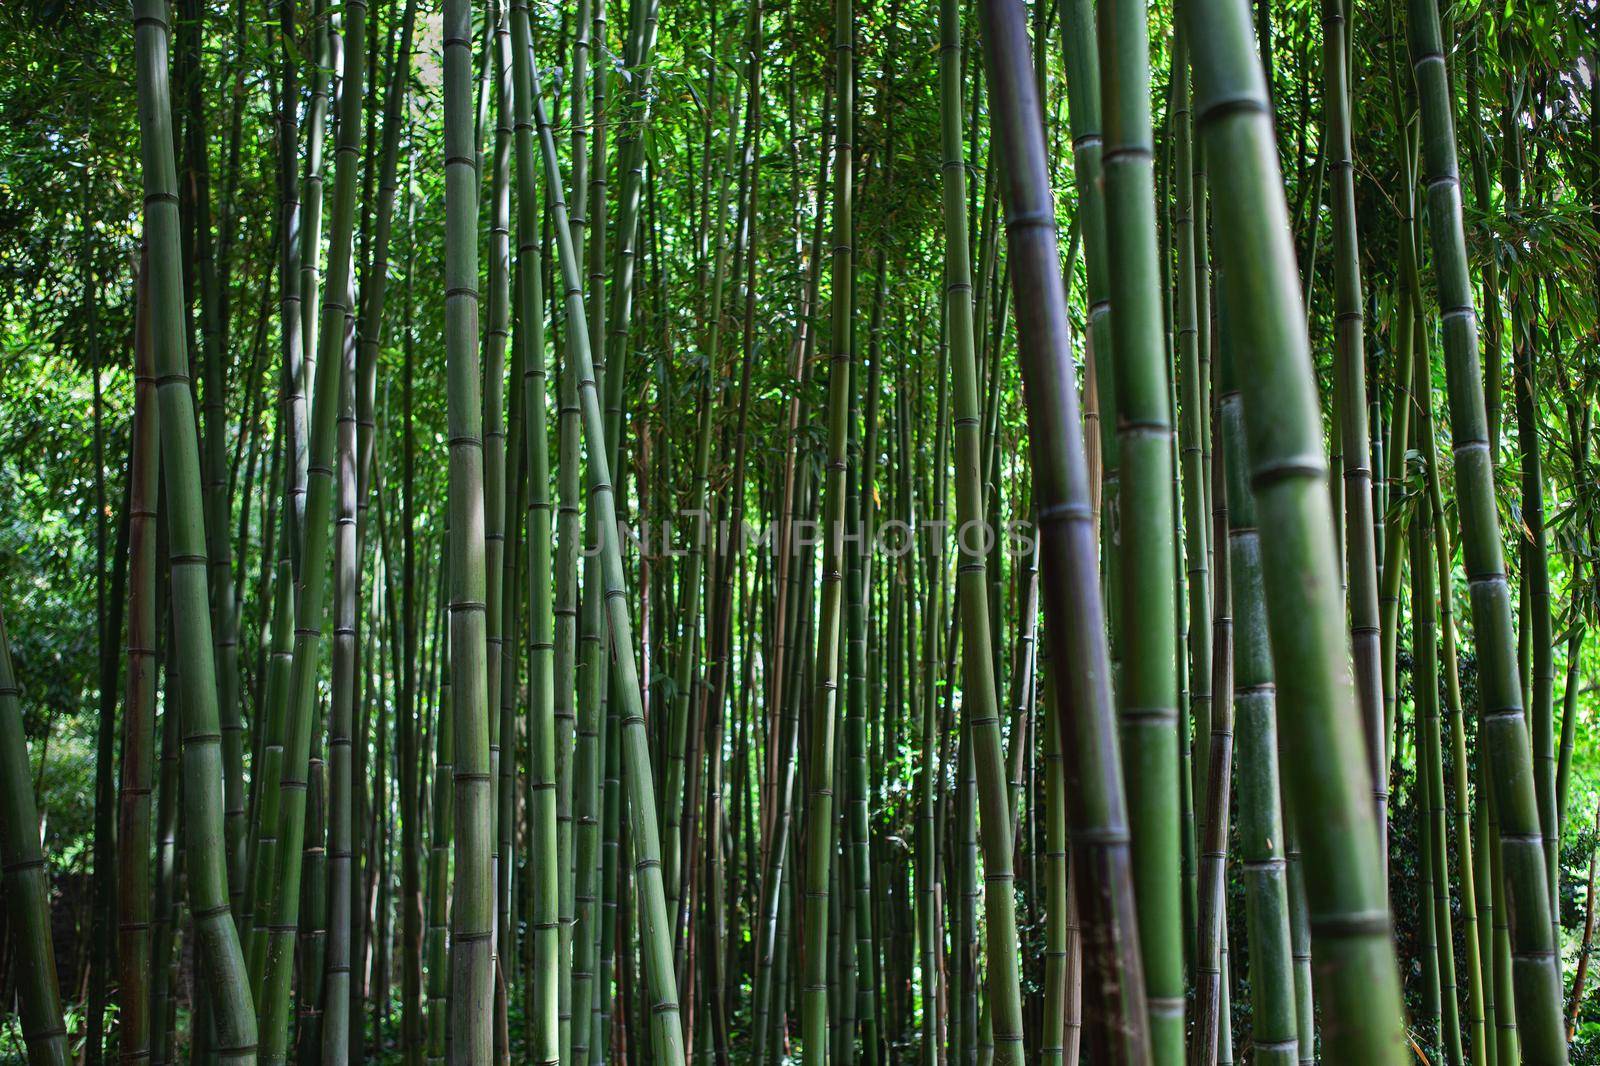 Bamboo background in a public park